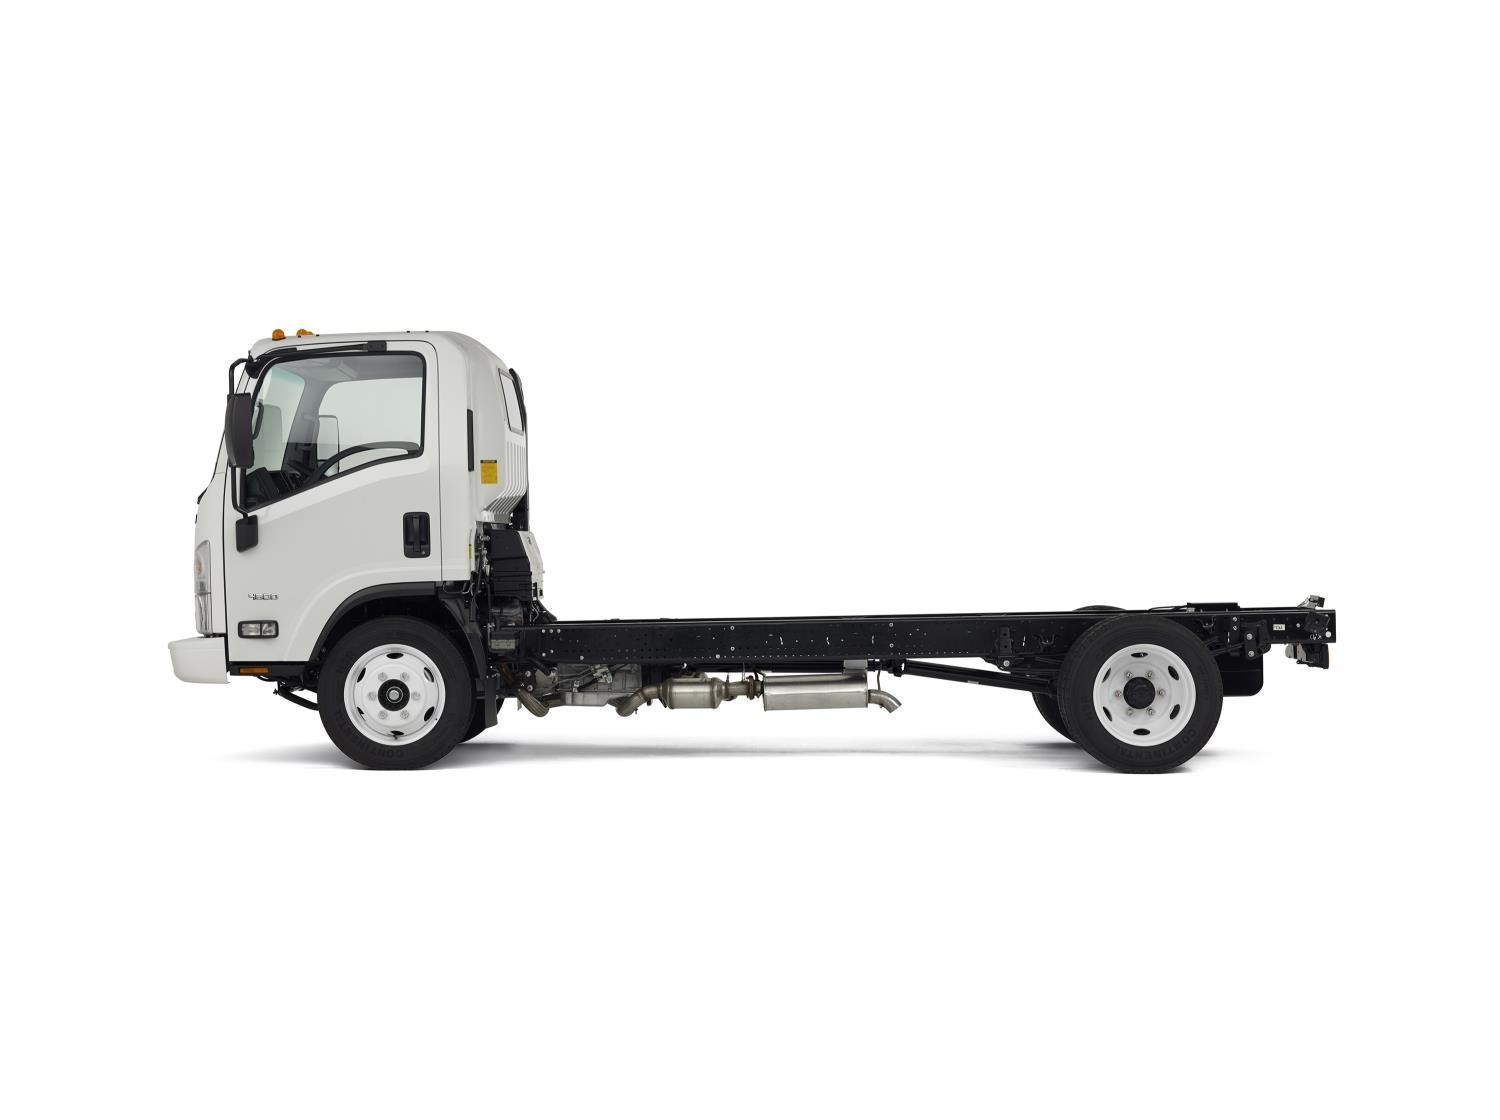 Chevrolet Low Cab Forward Truck Priced at 40,900 autoevolution